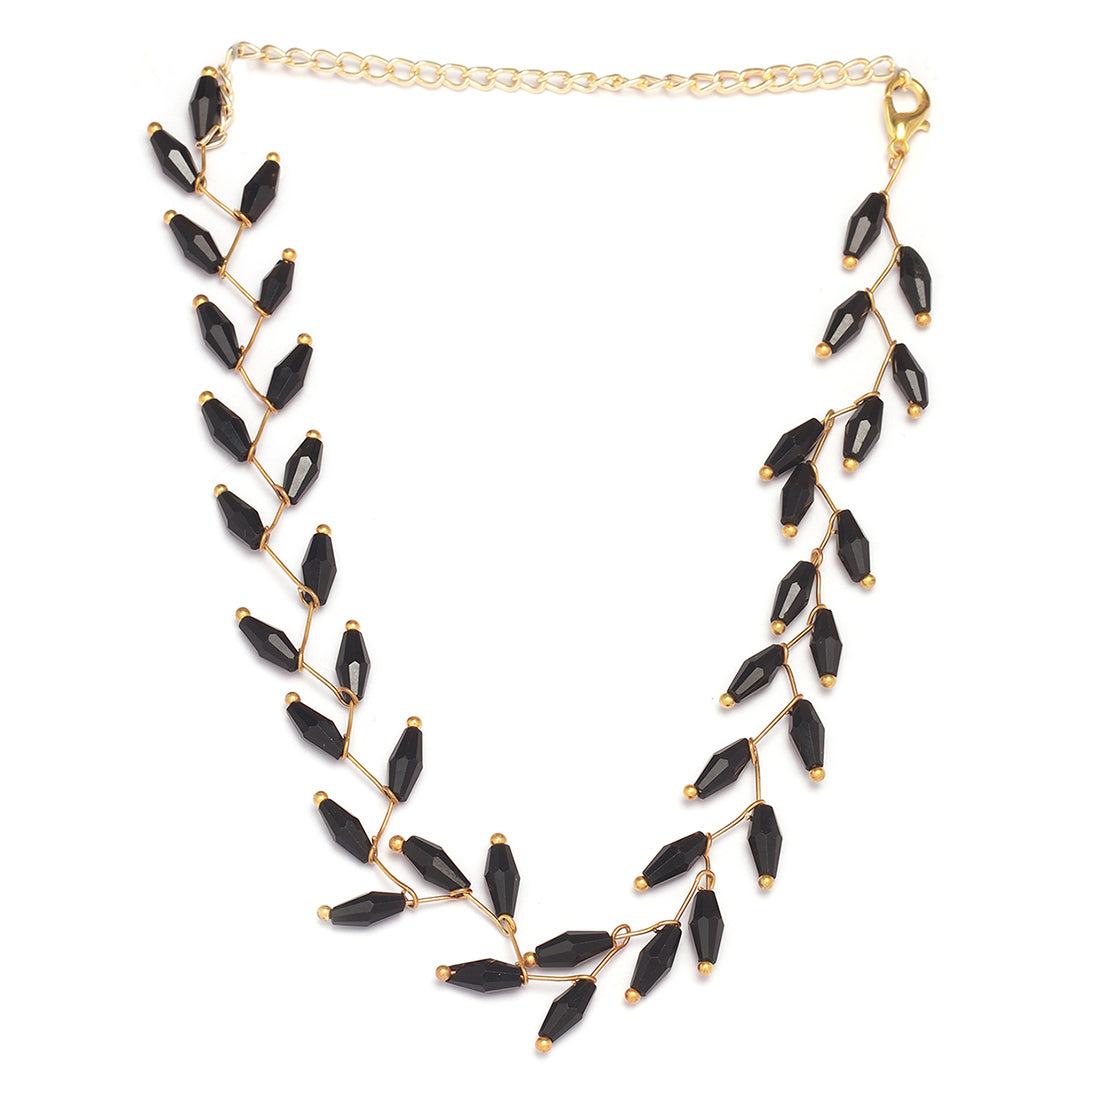 Gold-Tone Necklace With Black Oval-Shaped Translucent Beads In A Leaf Pattern